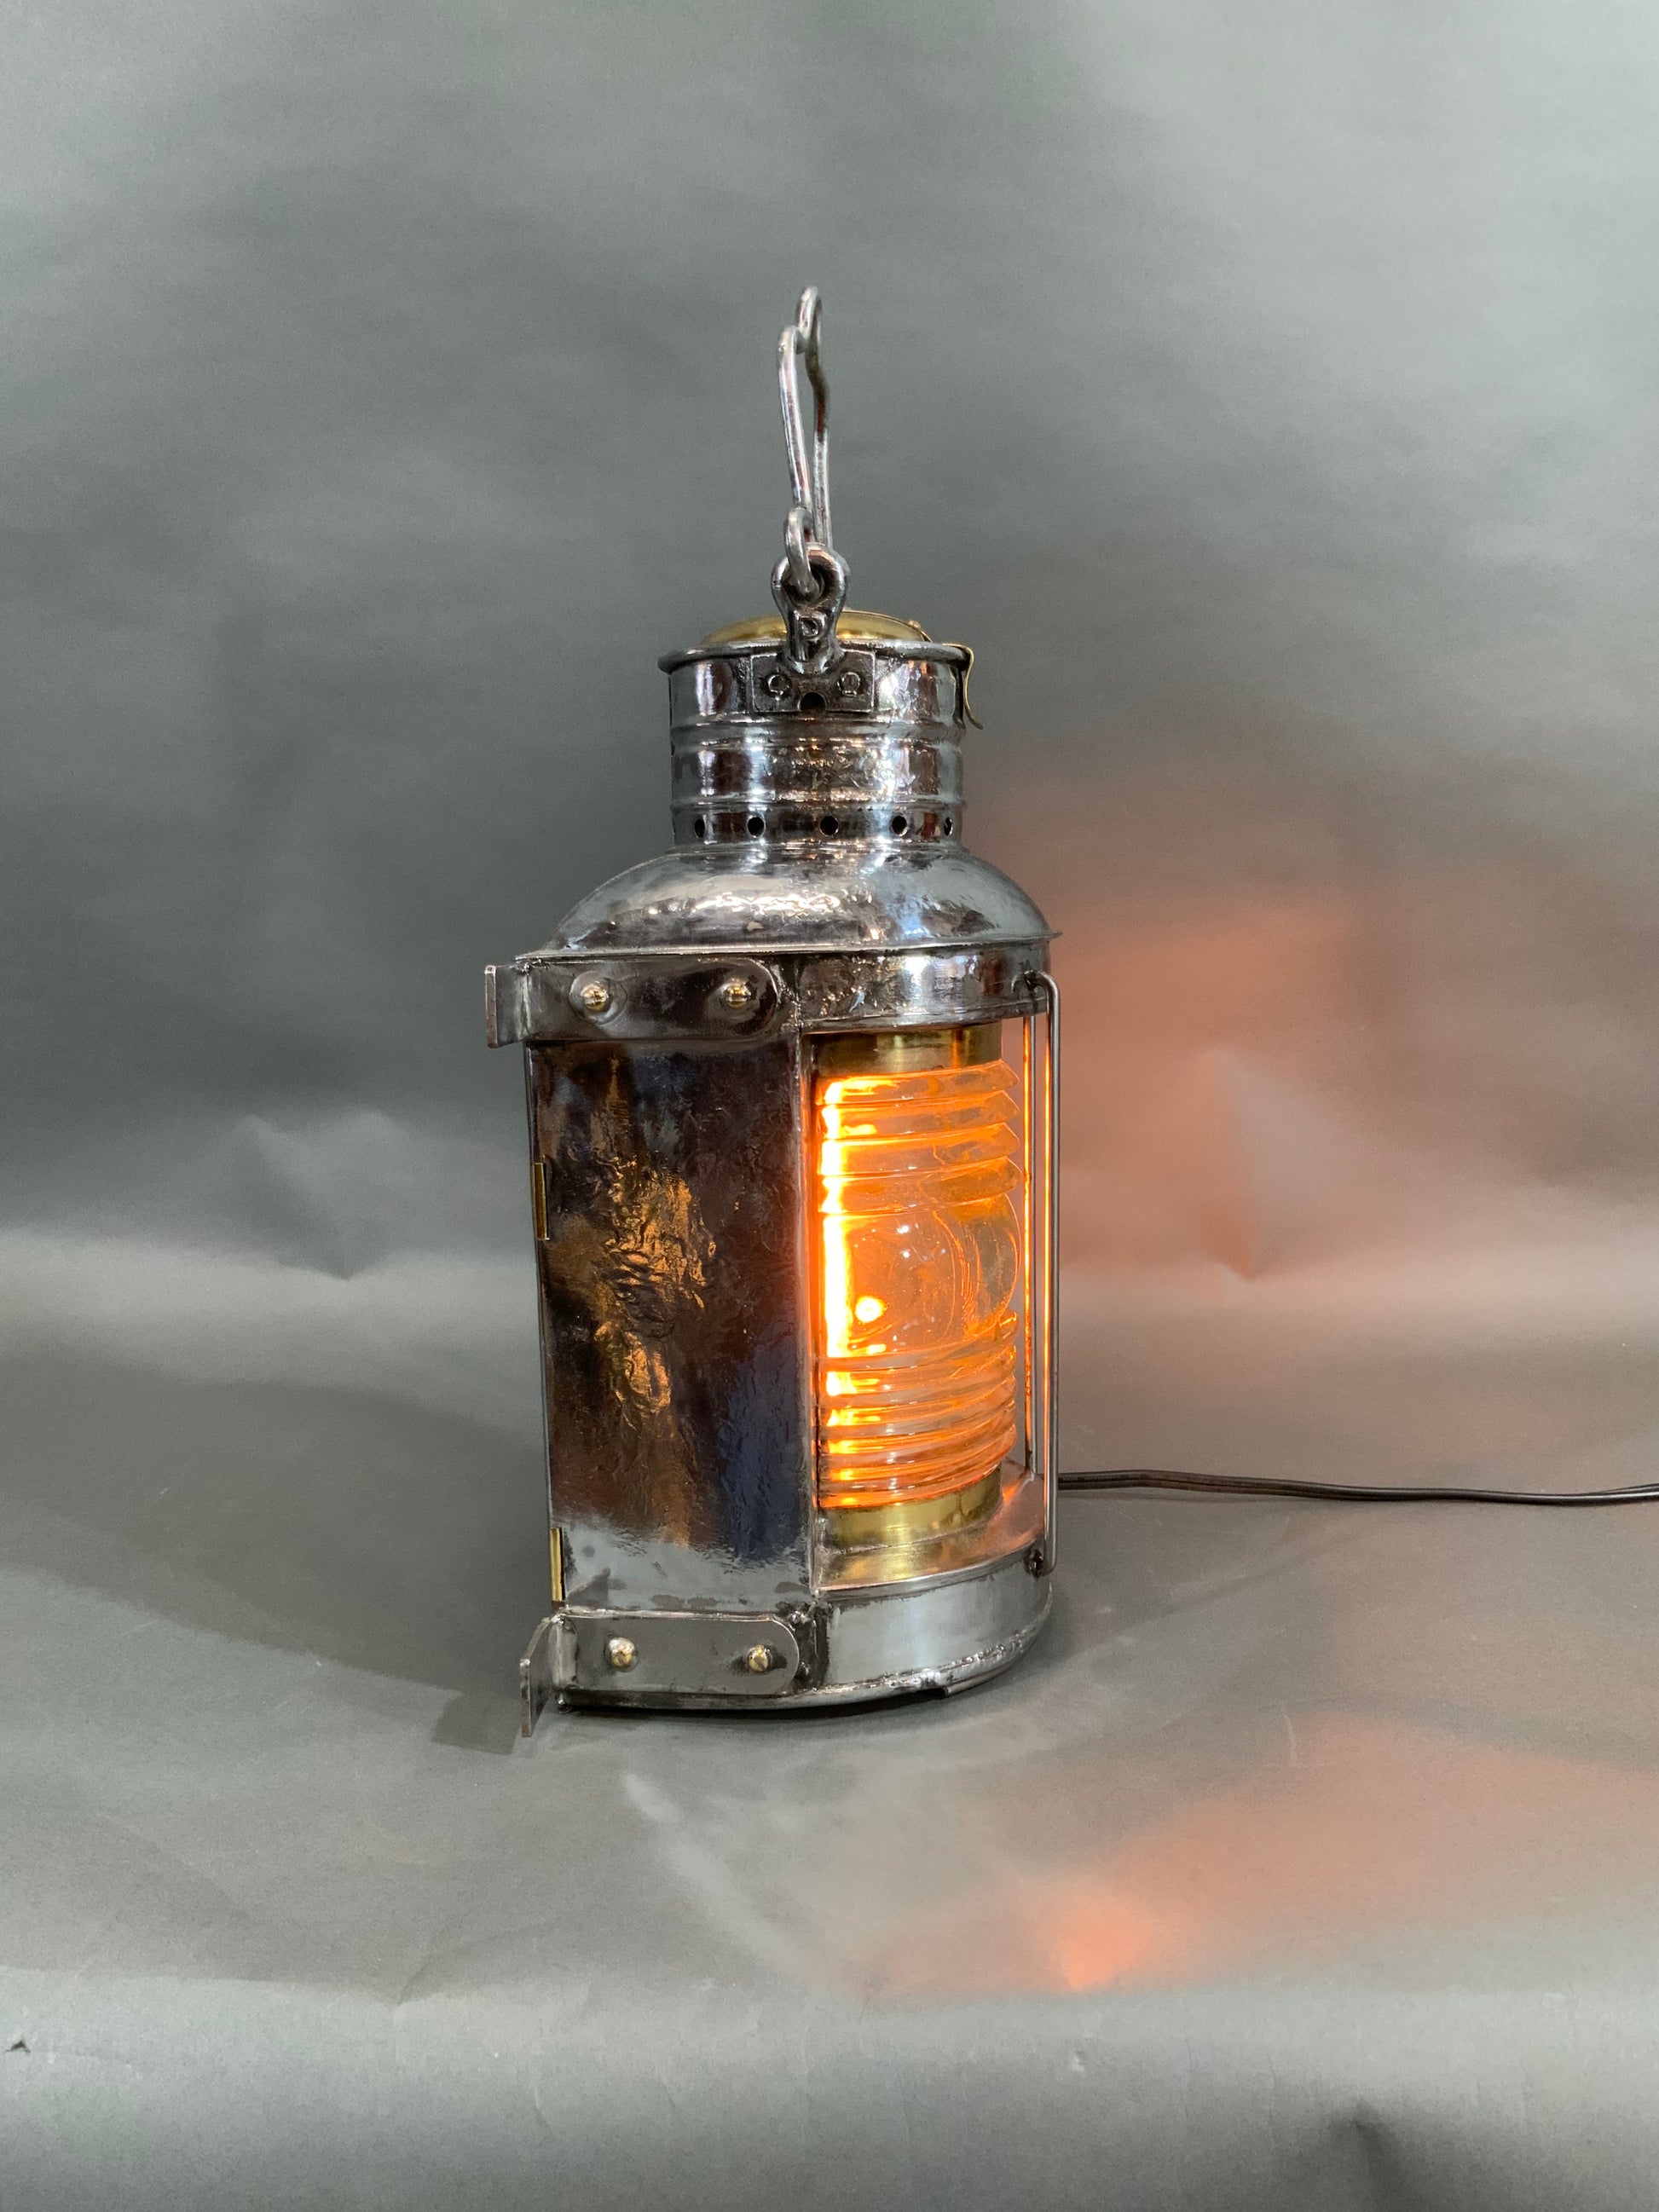 Ships Masthead Lantern with Polished Steel Case by National Marine - Lannan Gallery